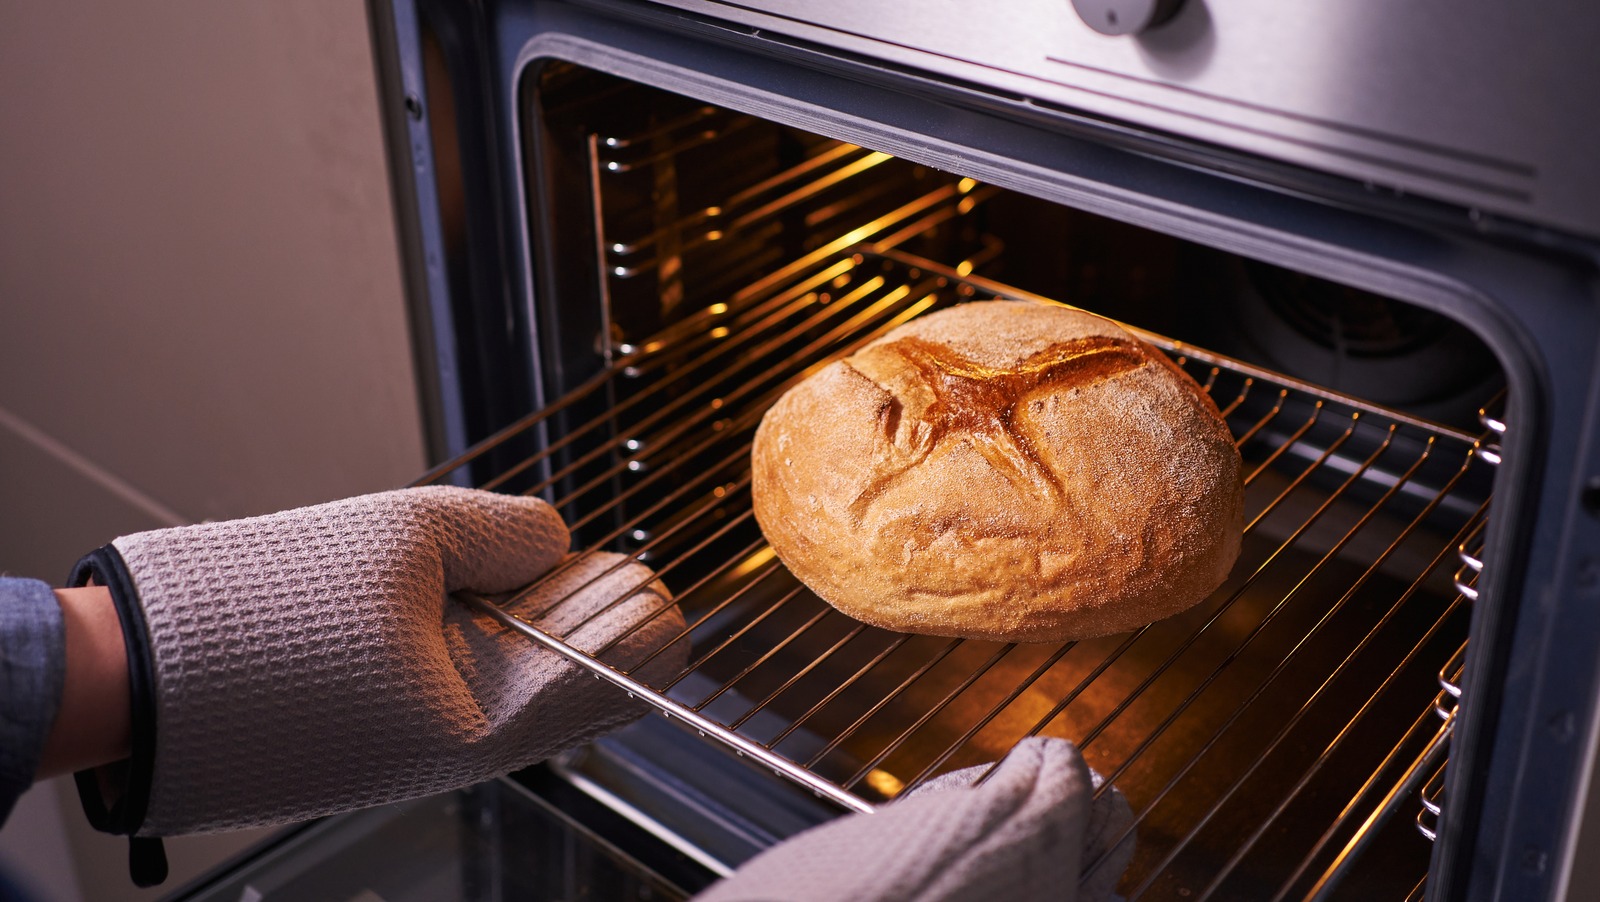 The Best Way To Clean An Oven